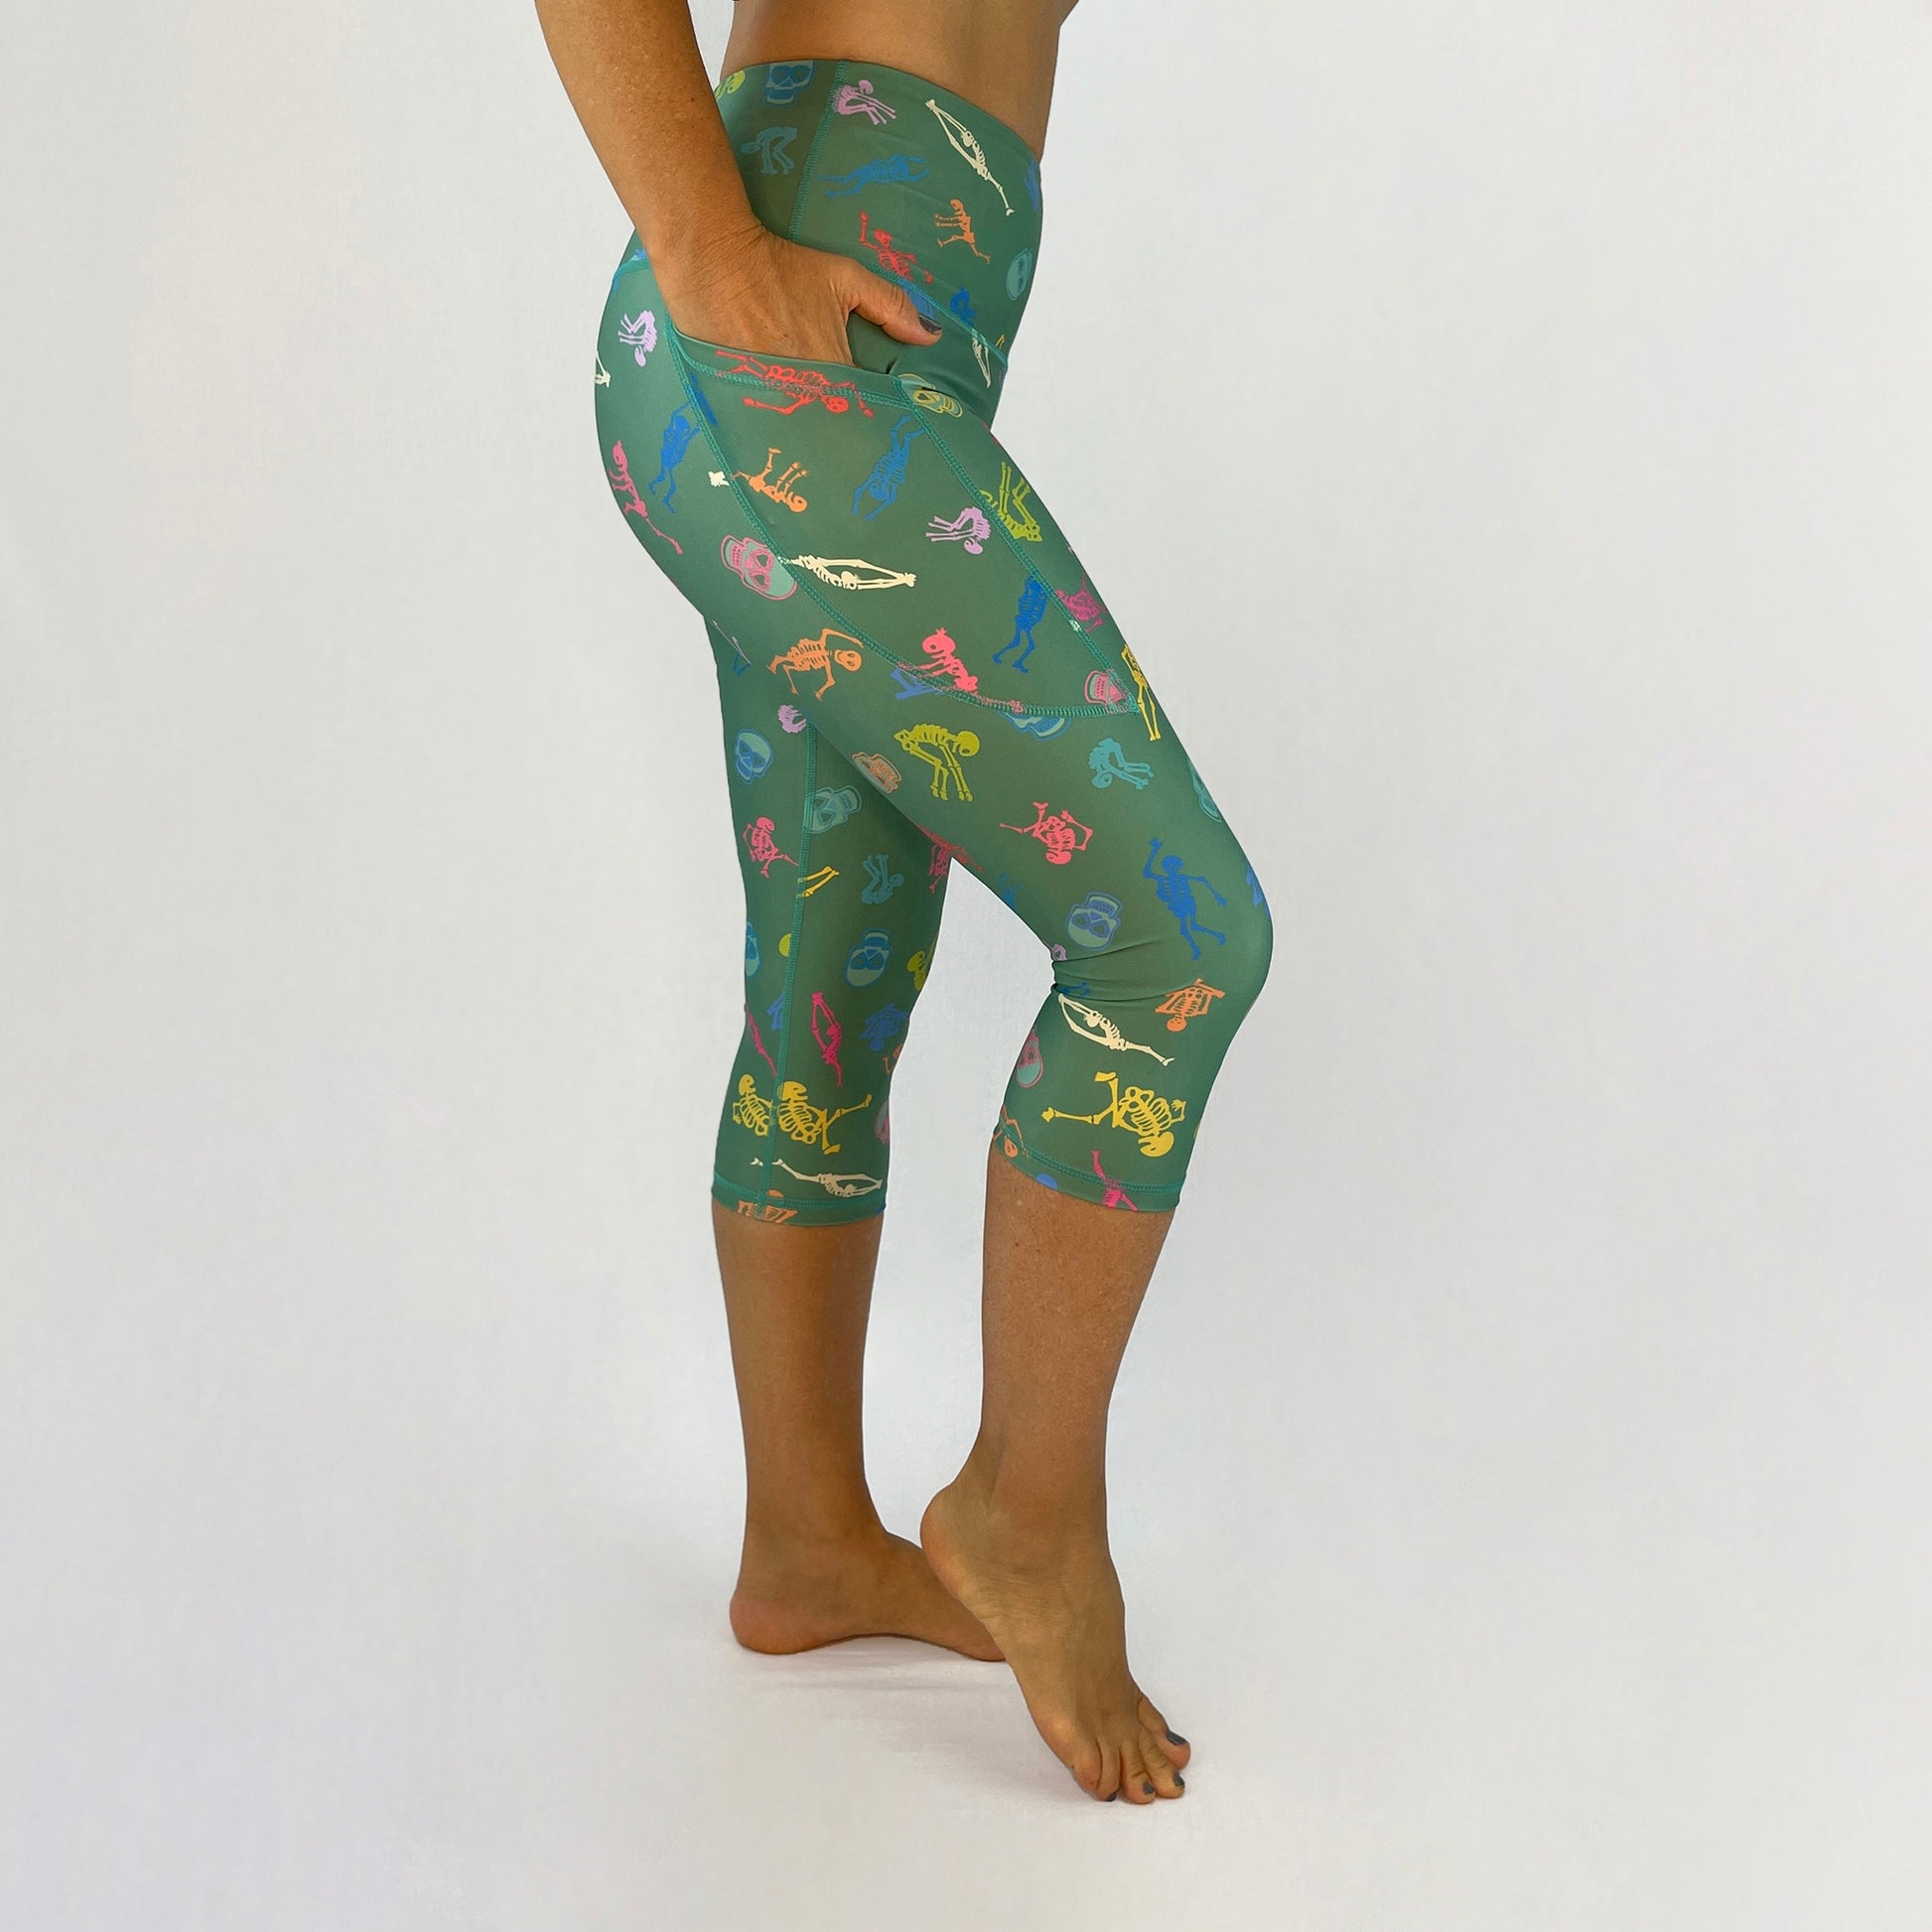 colourful high rise leggings with pockets made sustainably from recycled materials - skeletons and skulls side pocket